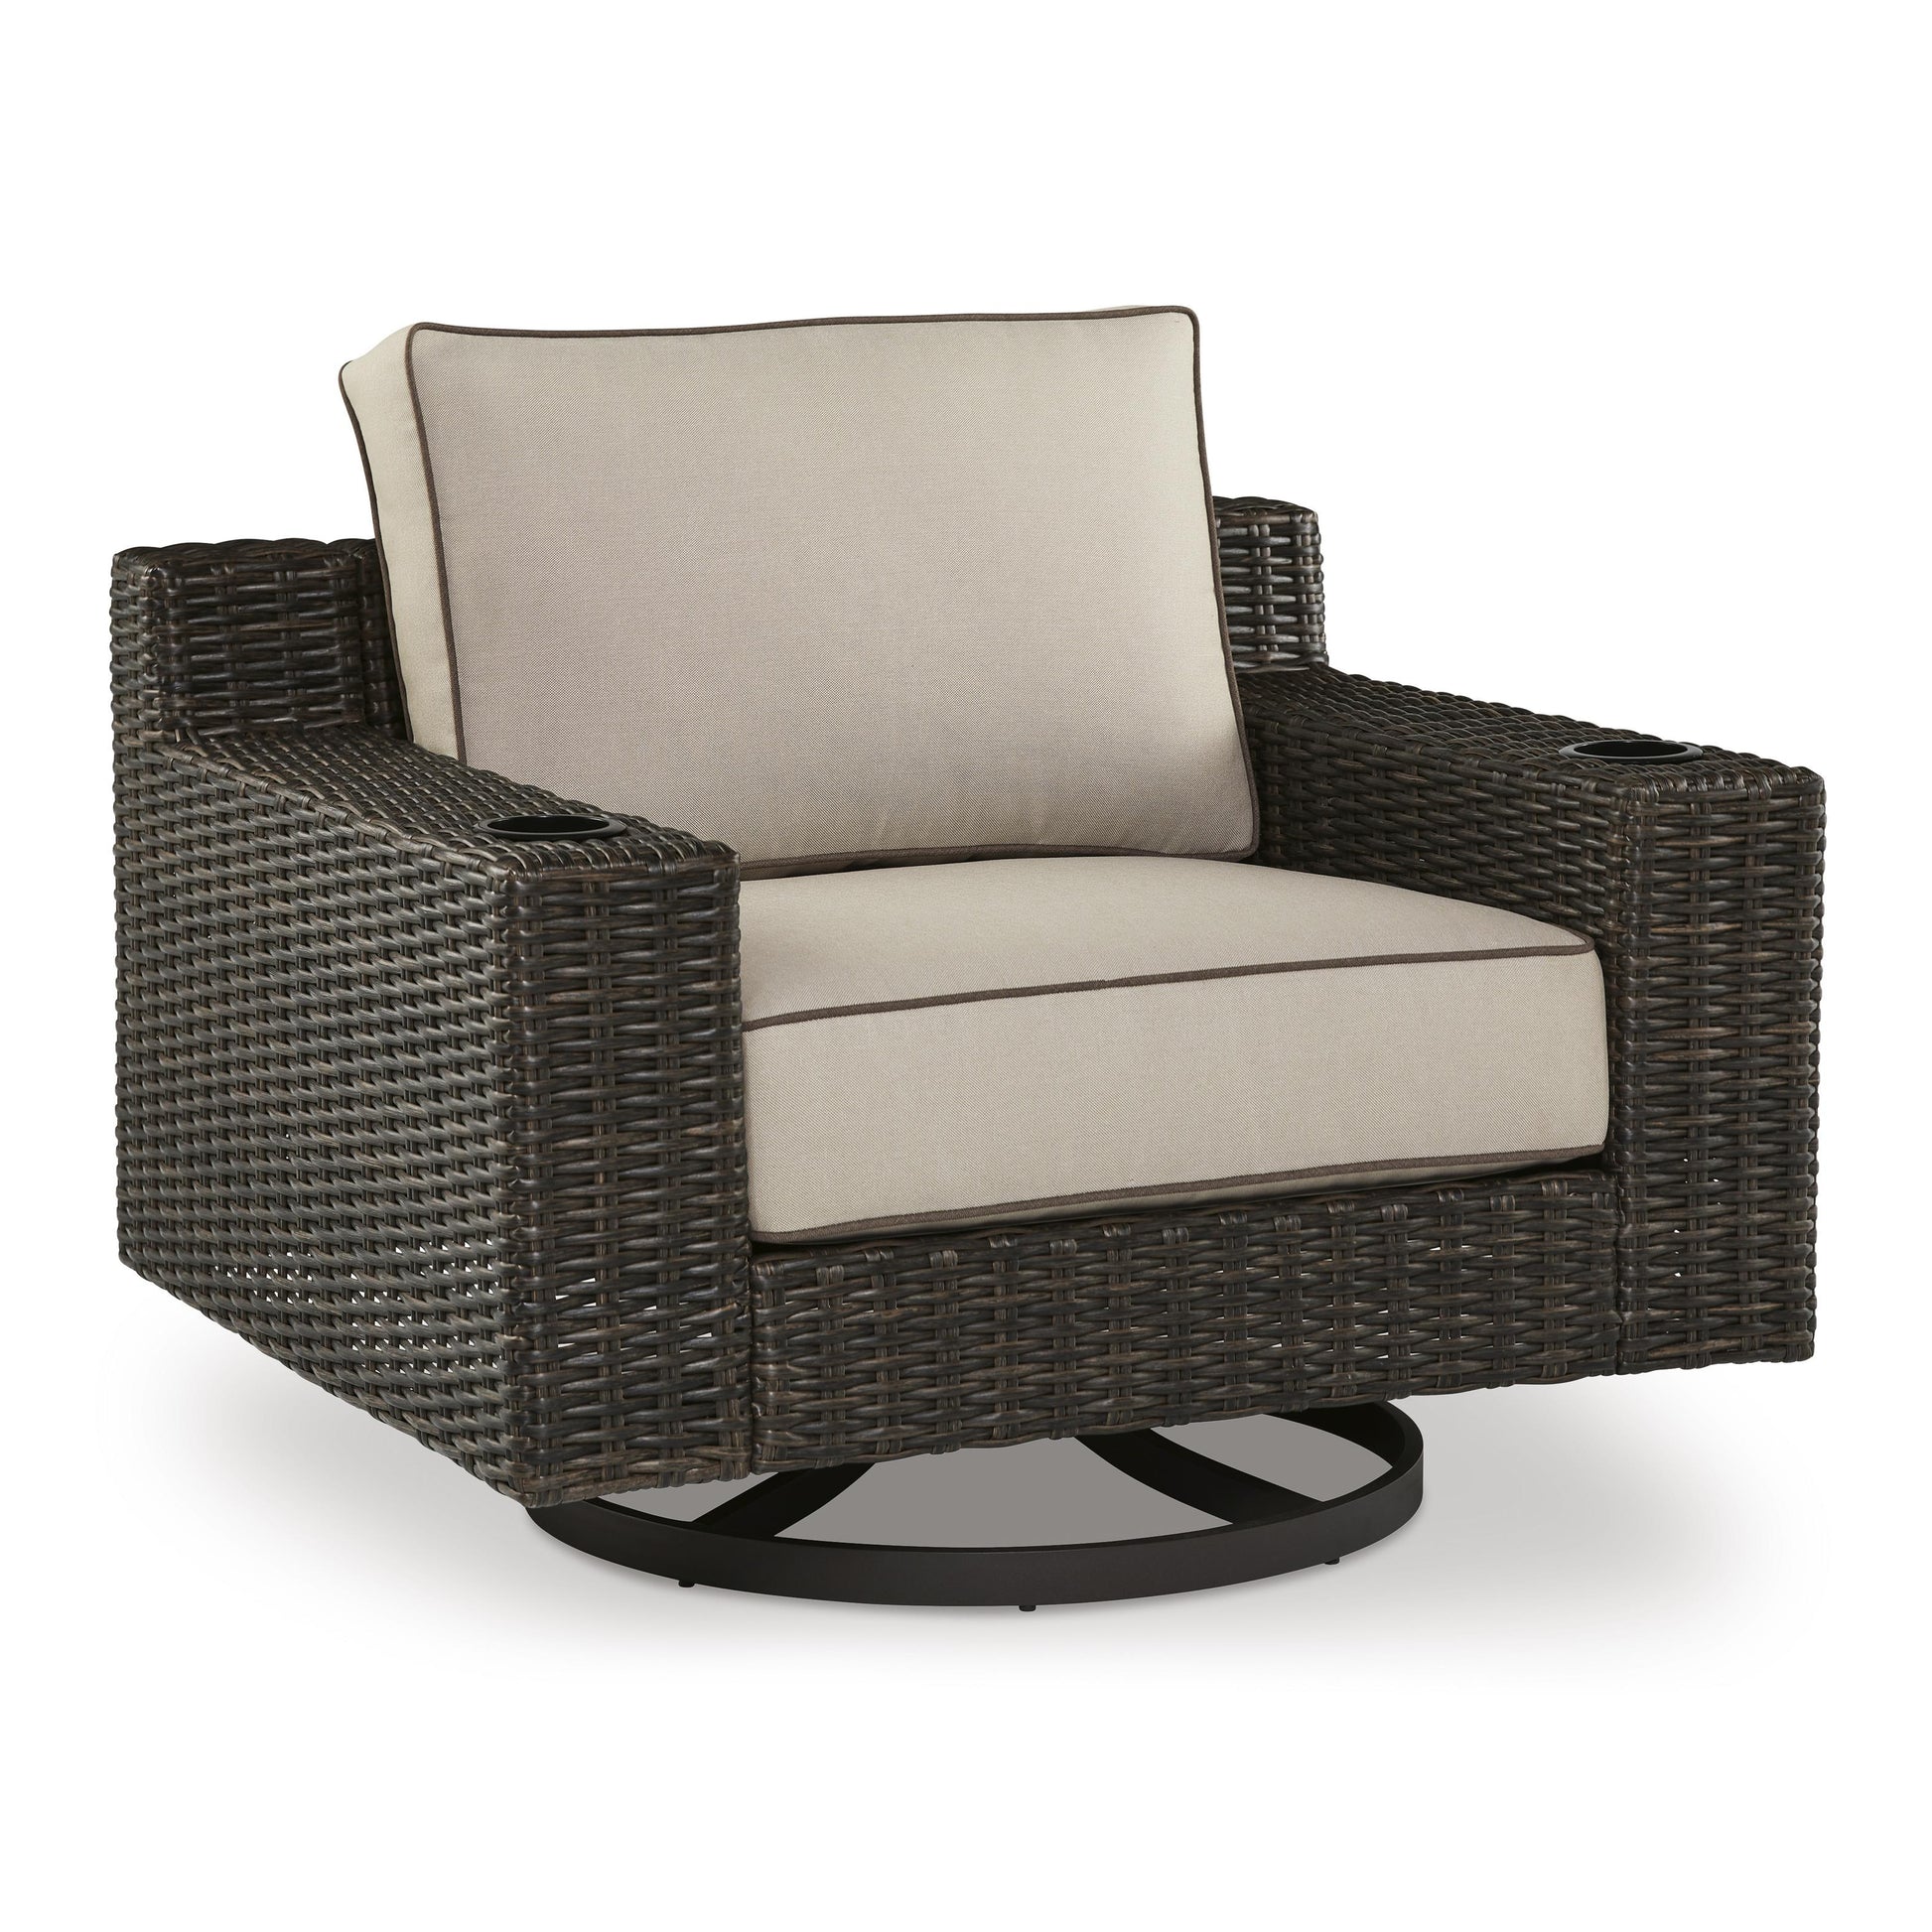 Signature Design by Ashley Outdoor Seating Lounge Chairs P784-821 IMAGE 1